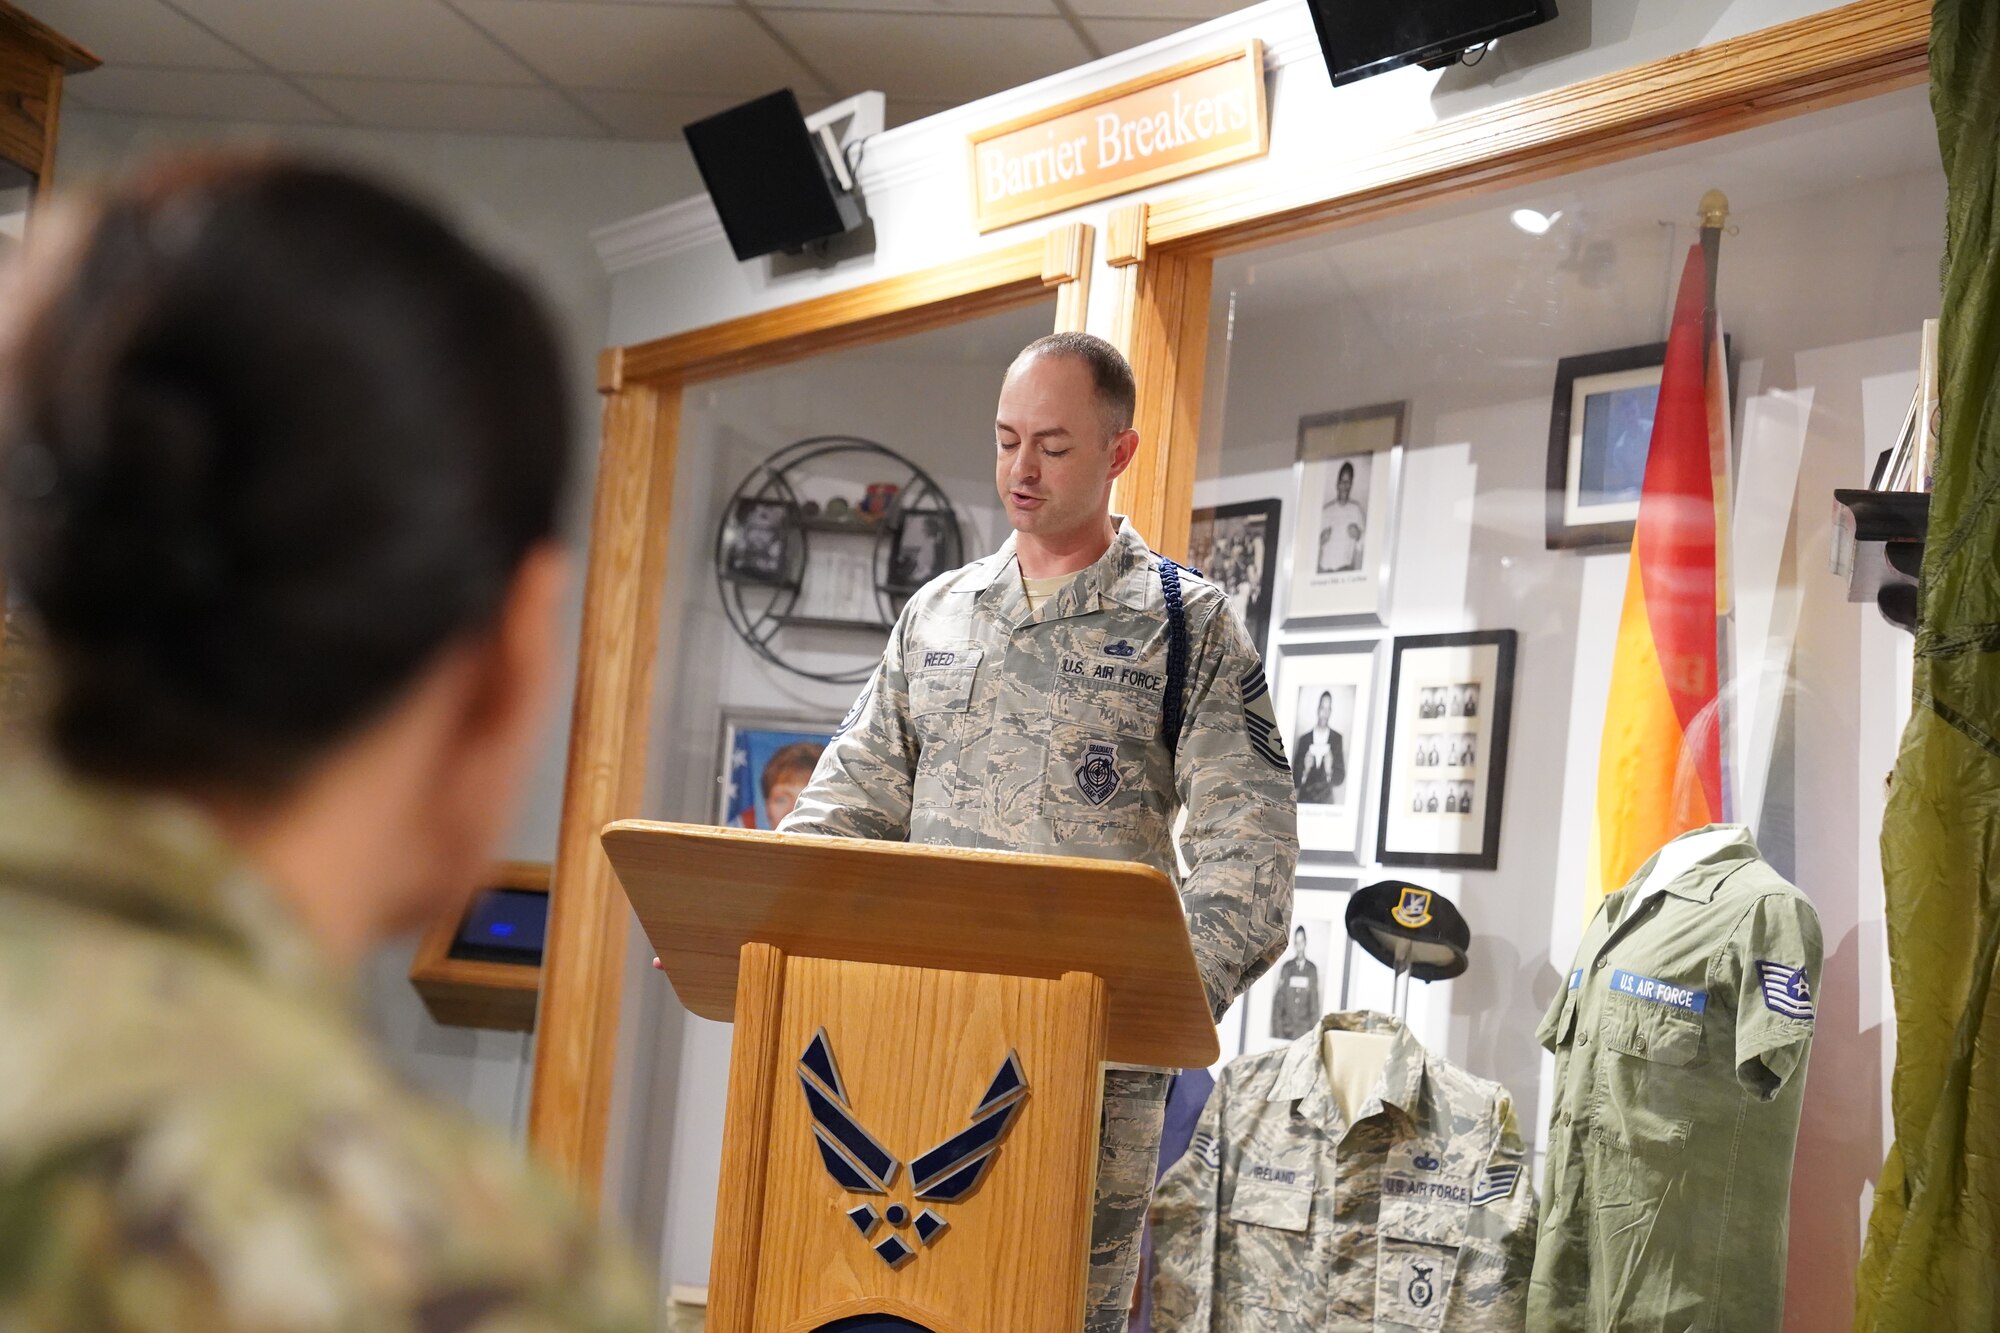 U.S Air Force Chief Master Sgt. Daniel Reed, Second Air Force military training instructor and military training leader career field manager, gives remarks before the unveiling of the MTL wall at the Air Force Enlisted Heritage Hall at Maxwell Air Force Base Gunter Annex, Alabama, Oct. 30, 2019. MTLs play a vital role in the development of the next generation of Air Force leaders, warfighters, and protectors of freedom. The Air Force Enlisted Heritage Hall has dedicated a wall to highlight their lineage and contributions to the Air Force. (U.S Air Force photo by Airman 1st Class Spencer Tobler)